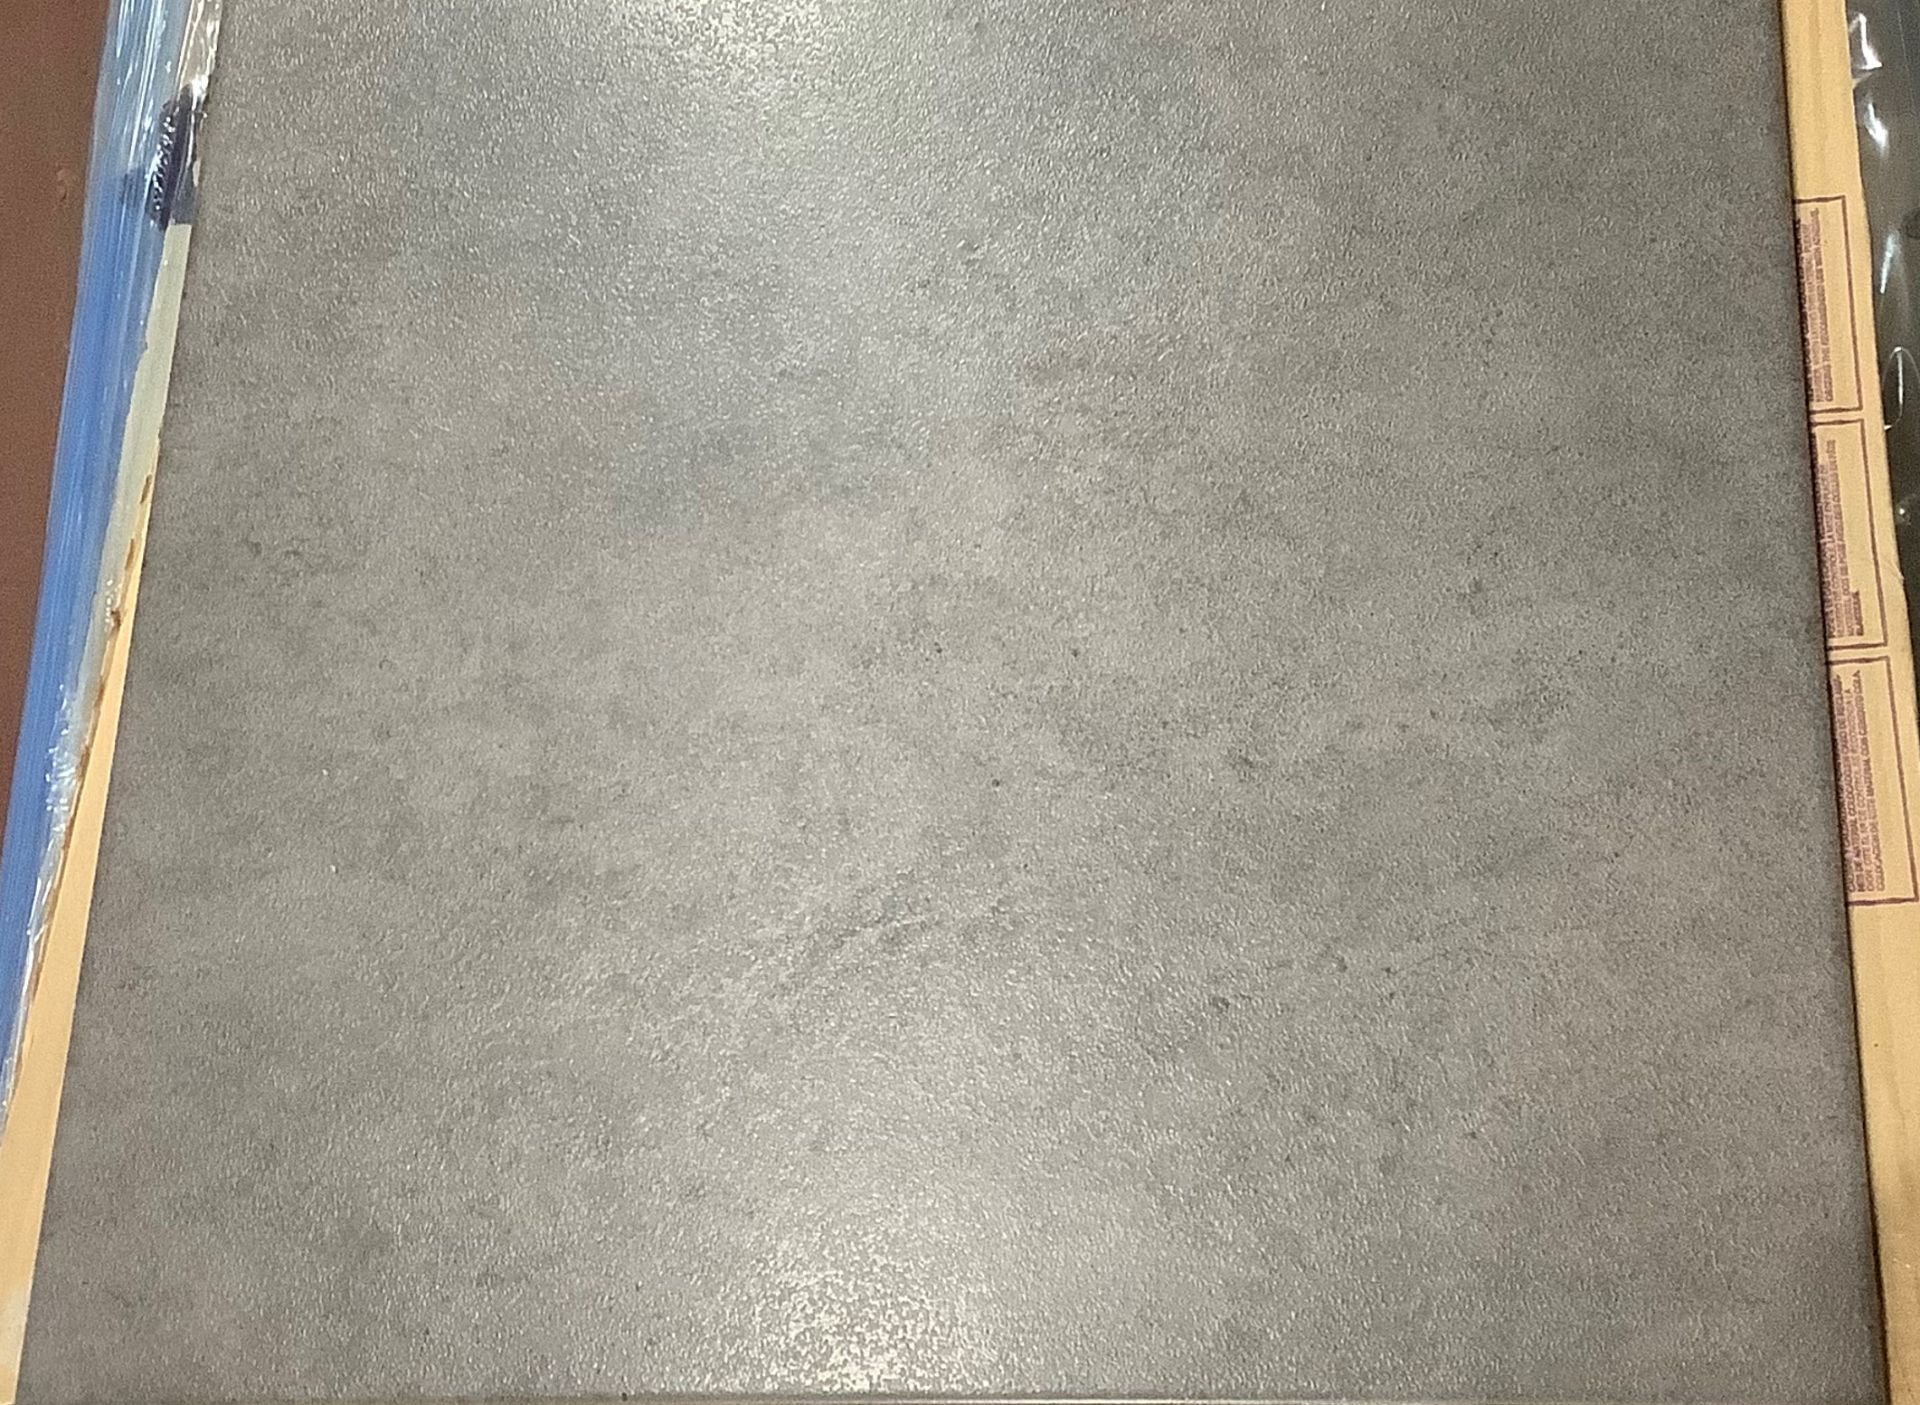 NEW 9.94m2 Porland Marengo Grey Wall and Floor Tiles. 450x450mm Per Tile, 8.8mm Thick. ndustria... - Image 2 of 3